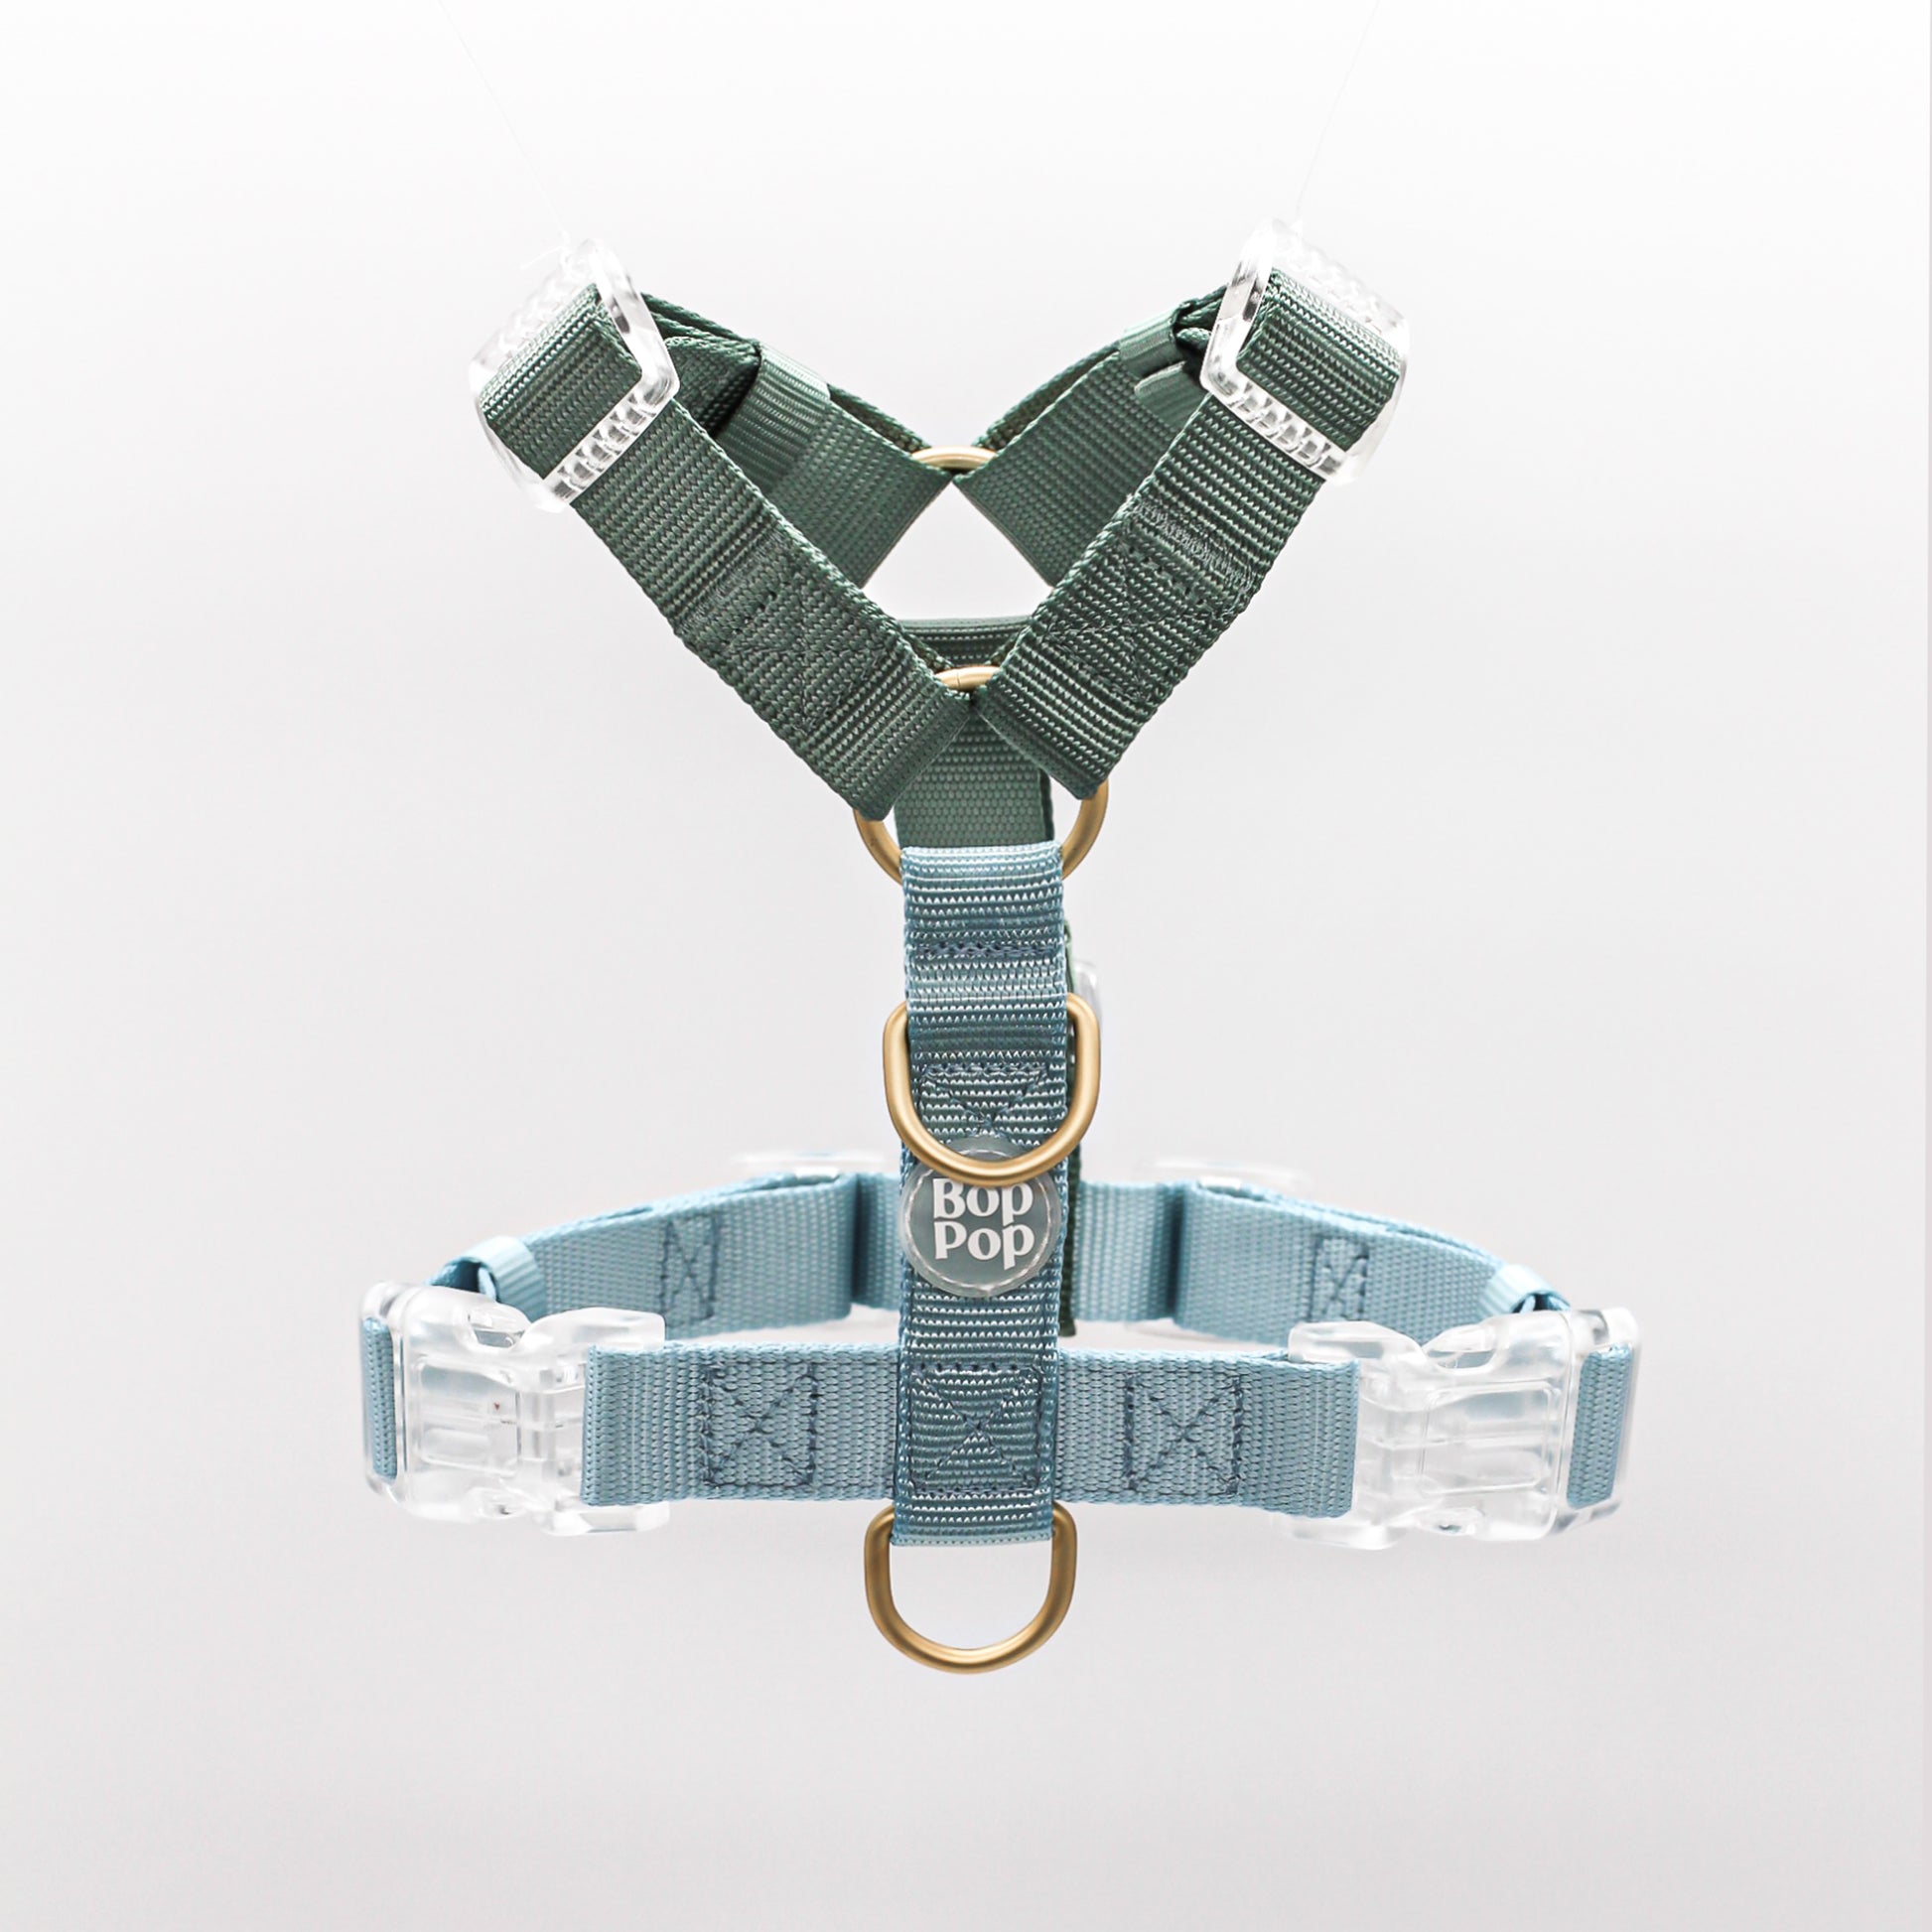 2 Color Dual Contrast Green Sage Baby Blue Aqua Classic Dog Nylon Strap Harness with Gold Hardware Clear Buckles Pet Accessory Bop Pop Pets